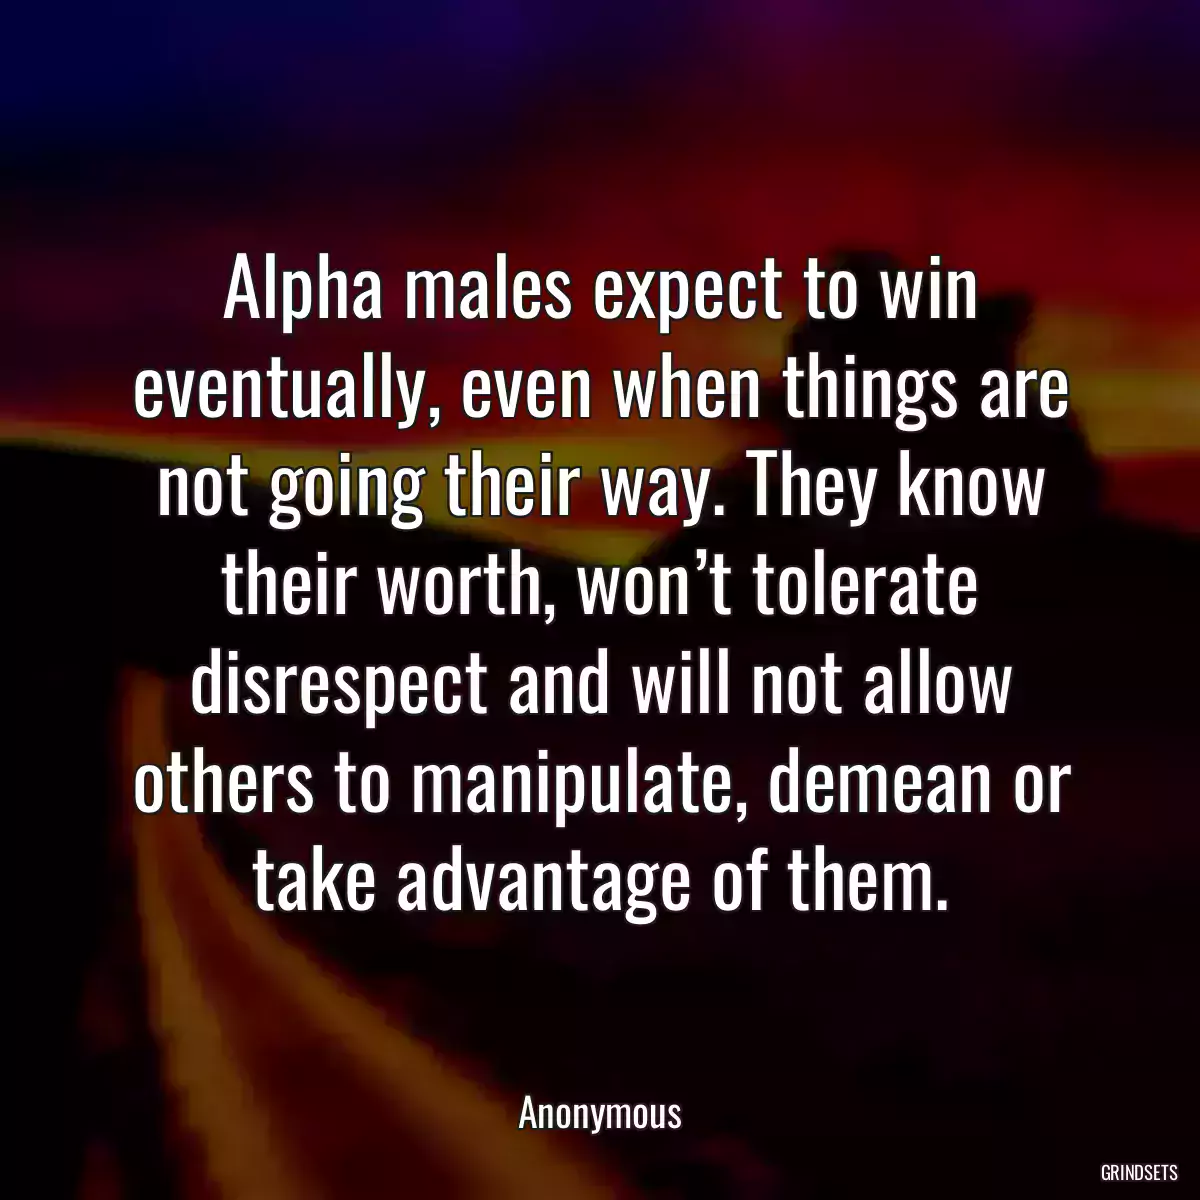 Alpha males expect to win eventually, even when things are not going their way. They know their worth, won’t tolerate disrespect and will not allow others to manipulate, demean or take advantage of them.